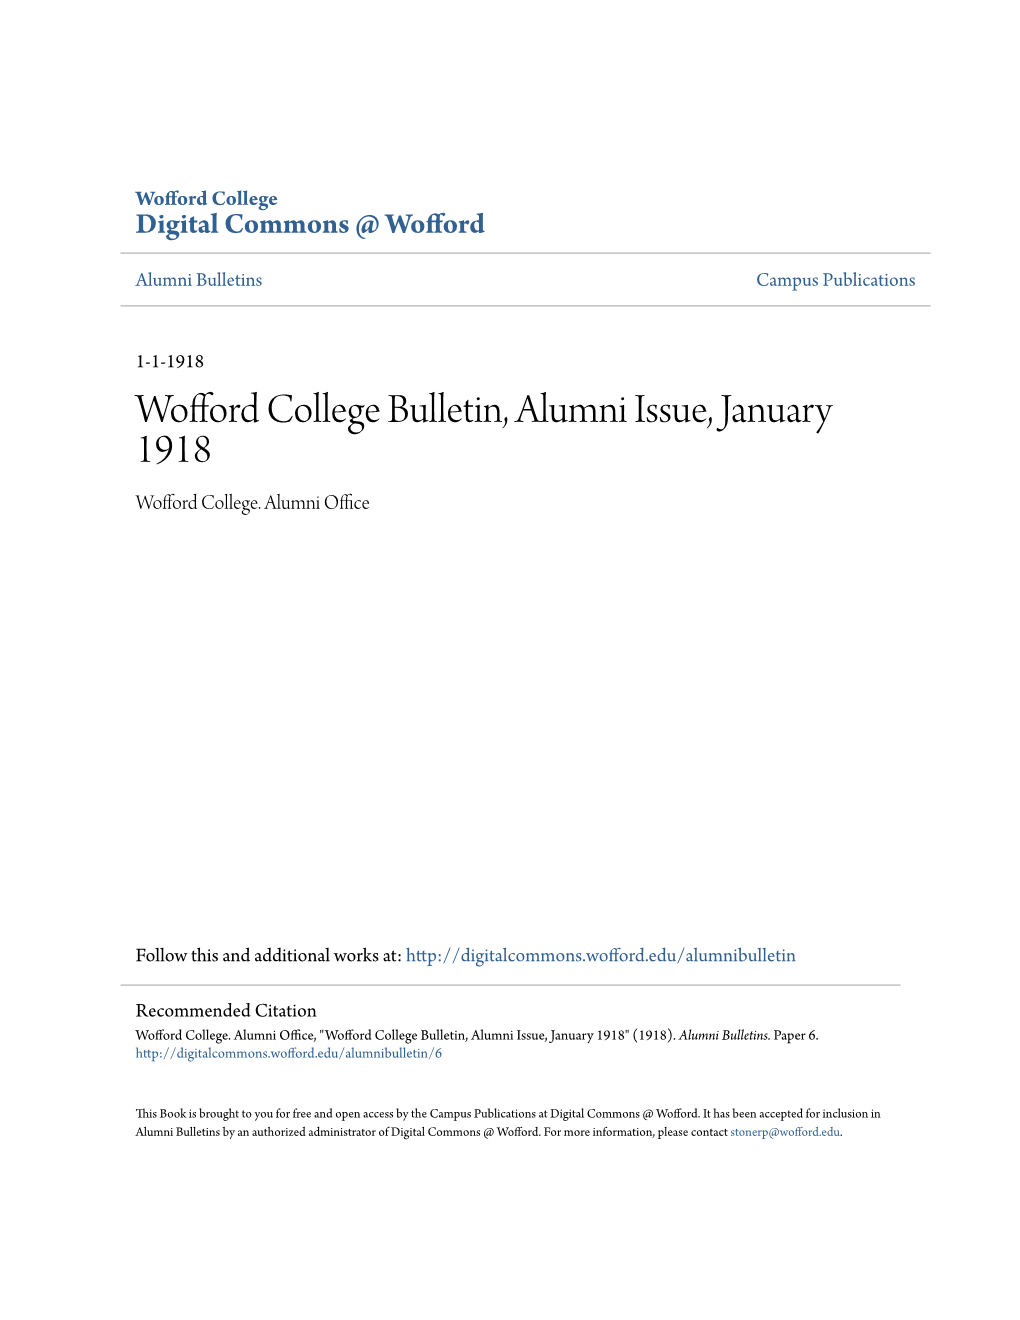 Wofford College Bulletin, Alumni Issue, January 1918 Wofford College